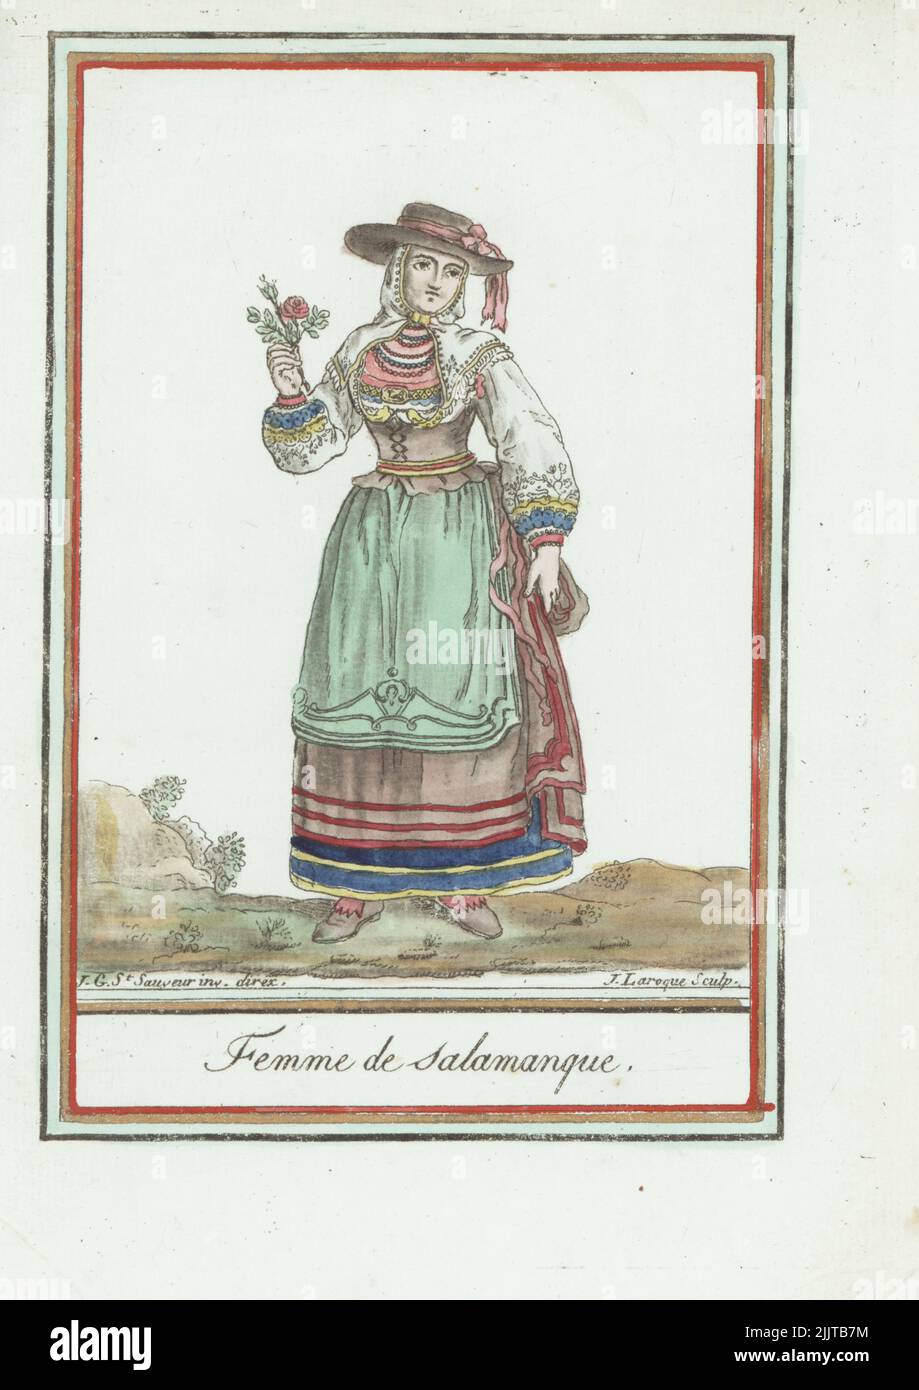 Woman of Salamanca, Kingdom of Leon, Spain. In wide brim hat with ribbons, chaperon or kerchief tied to an embroidered corset, blouse with embroidered sleeves, apron and long skirts. She holds a single rose. Femme de Salamanque., Royaume de Leon.  Handcoloured copperplate engraving by J. Laroque after a design by Jacques Grasset de Saint-Sauveur from his Encyclopedie des voyages, Encyclopedia of Voyages, Bordeaux, France, 1792. Stock Photo